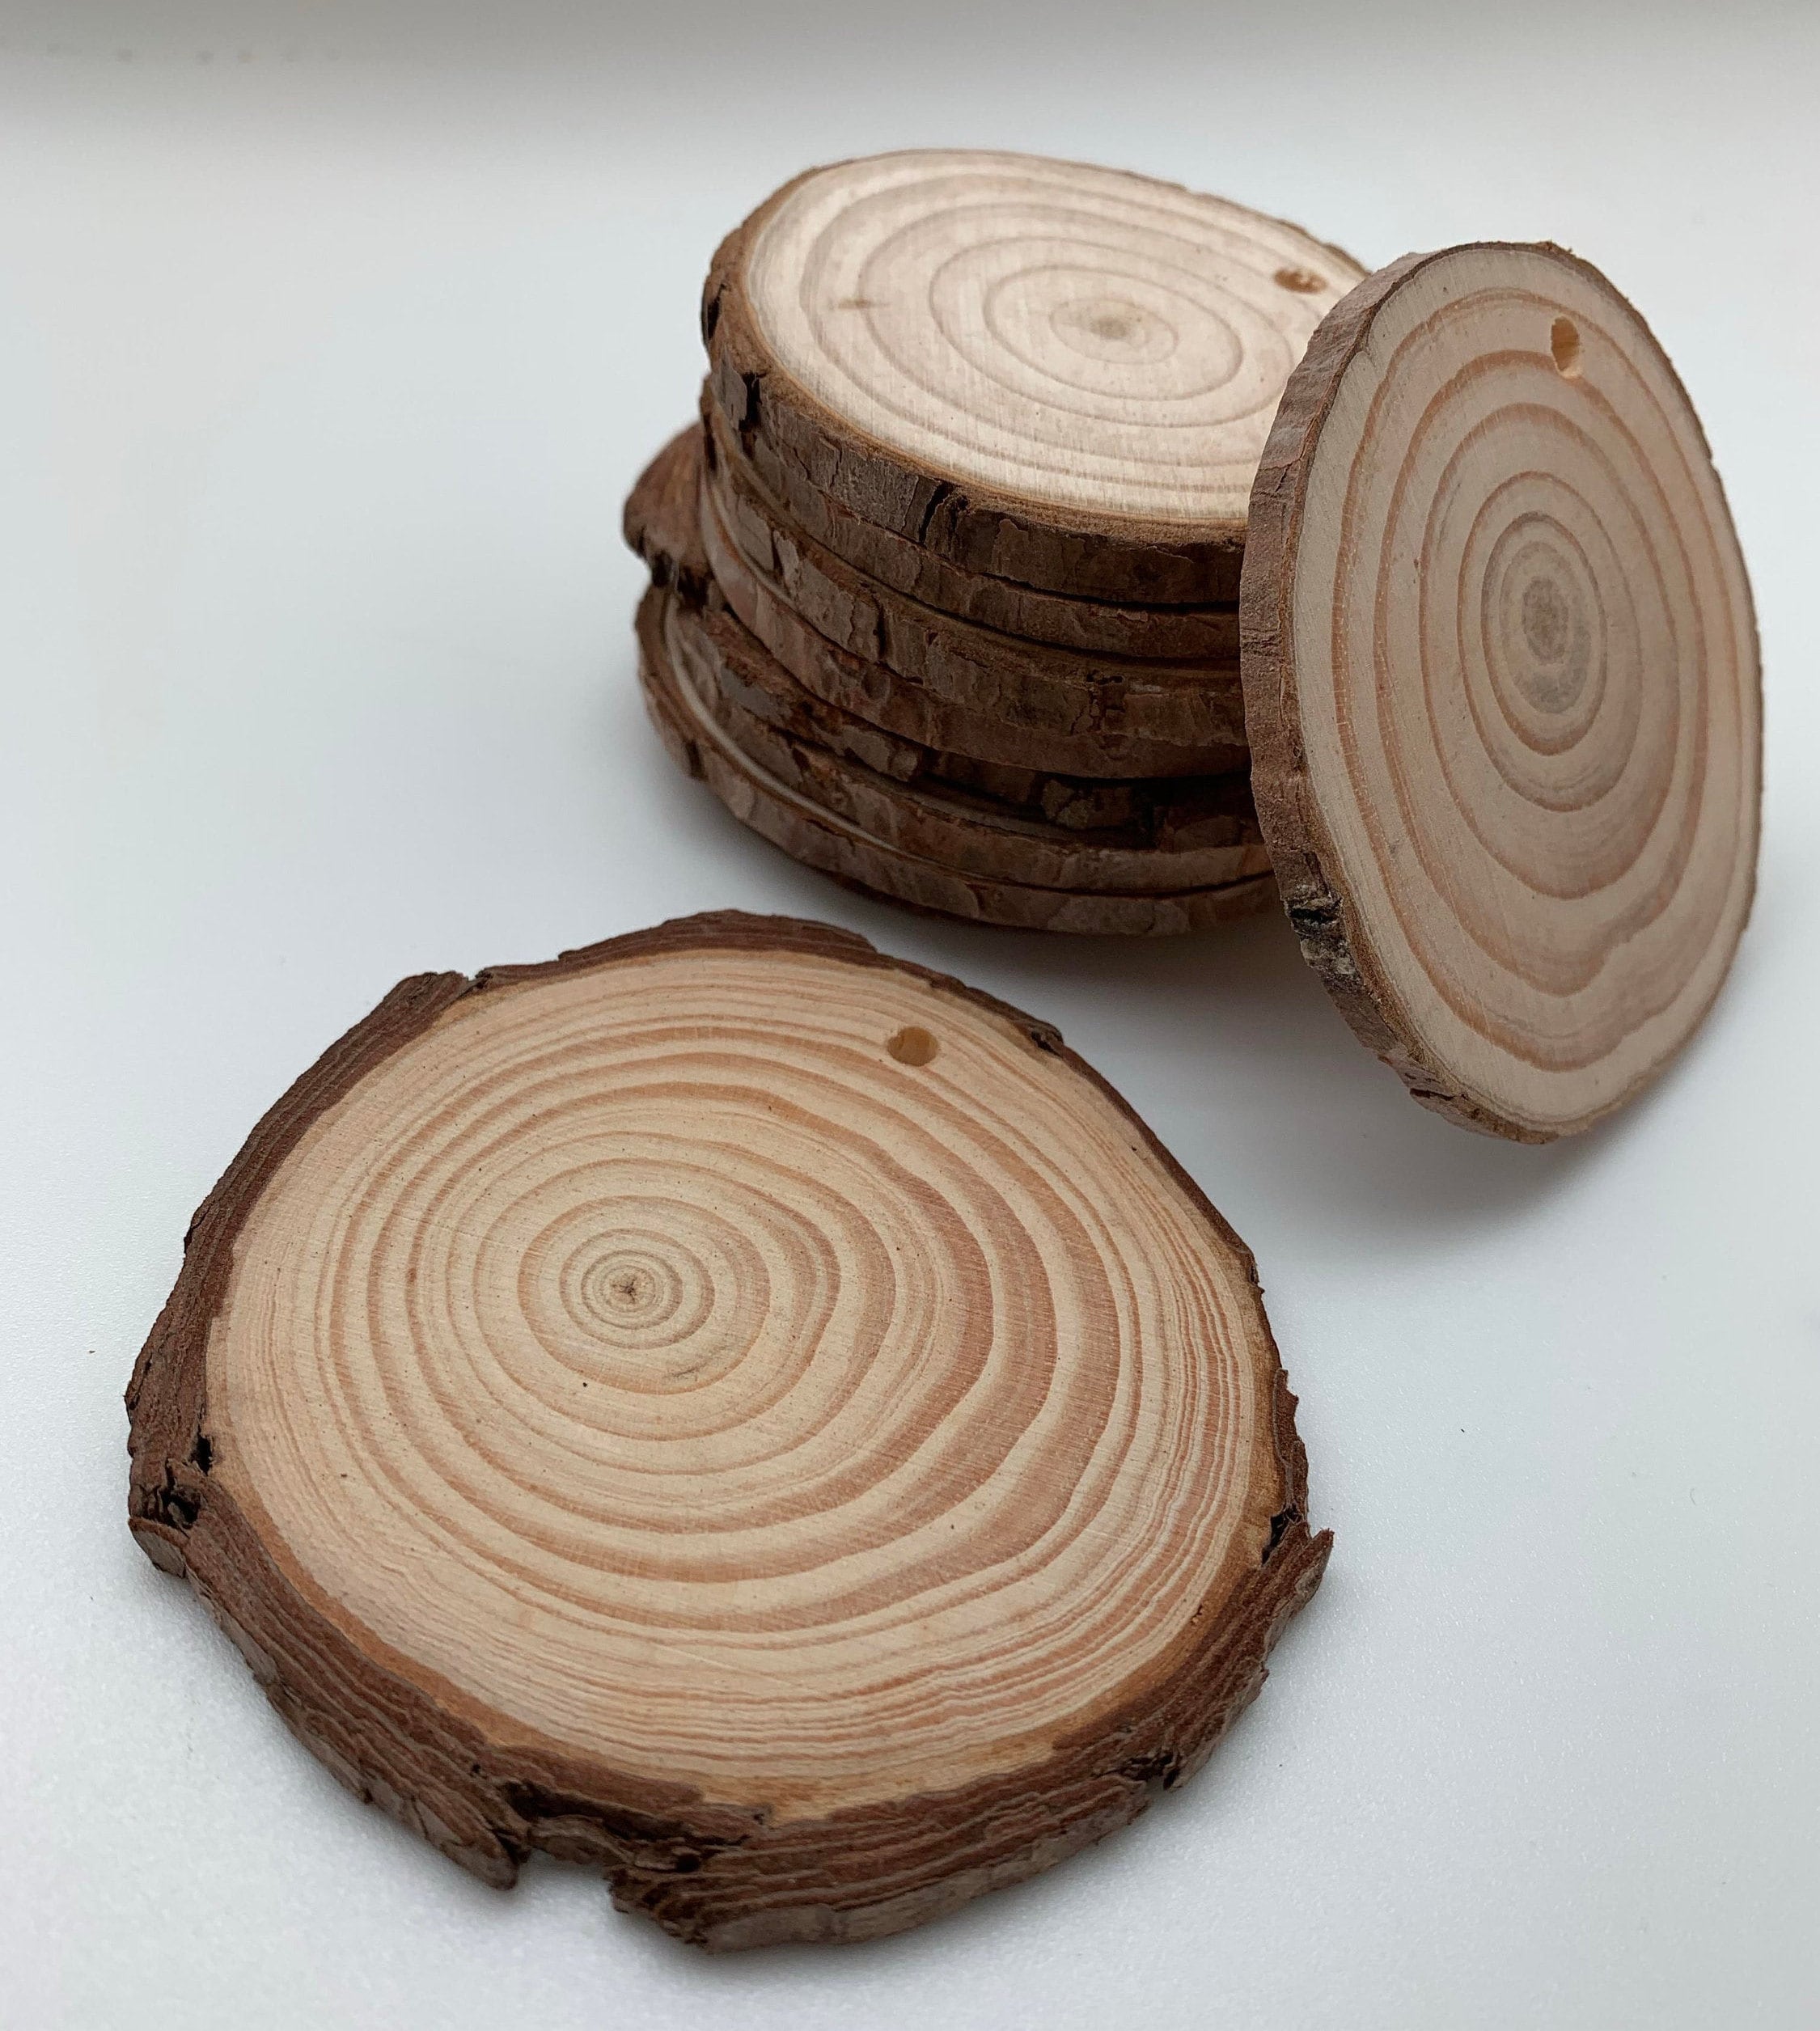 Oval Wood Coasters 5 inch, Pack of 2 Wooden Ornaments for Crafts, Unfinished Wood Crafts, Natural Wood Slices, by Woodpeckers